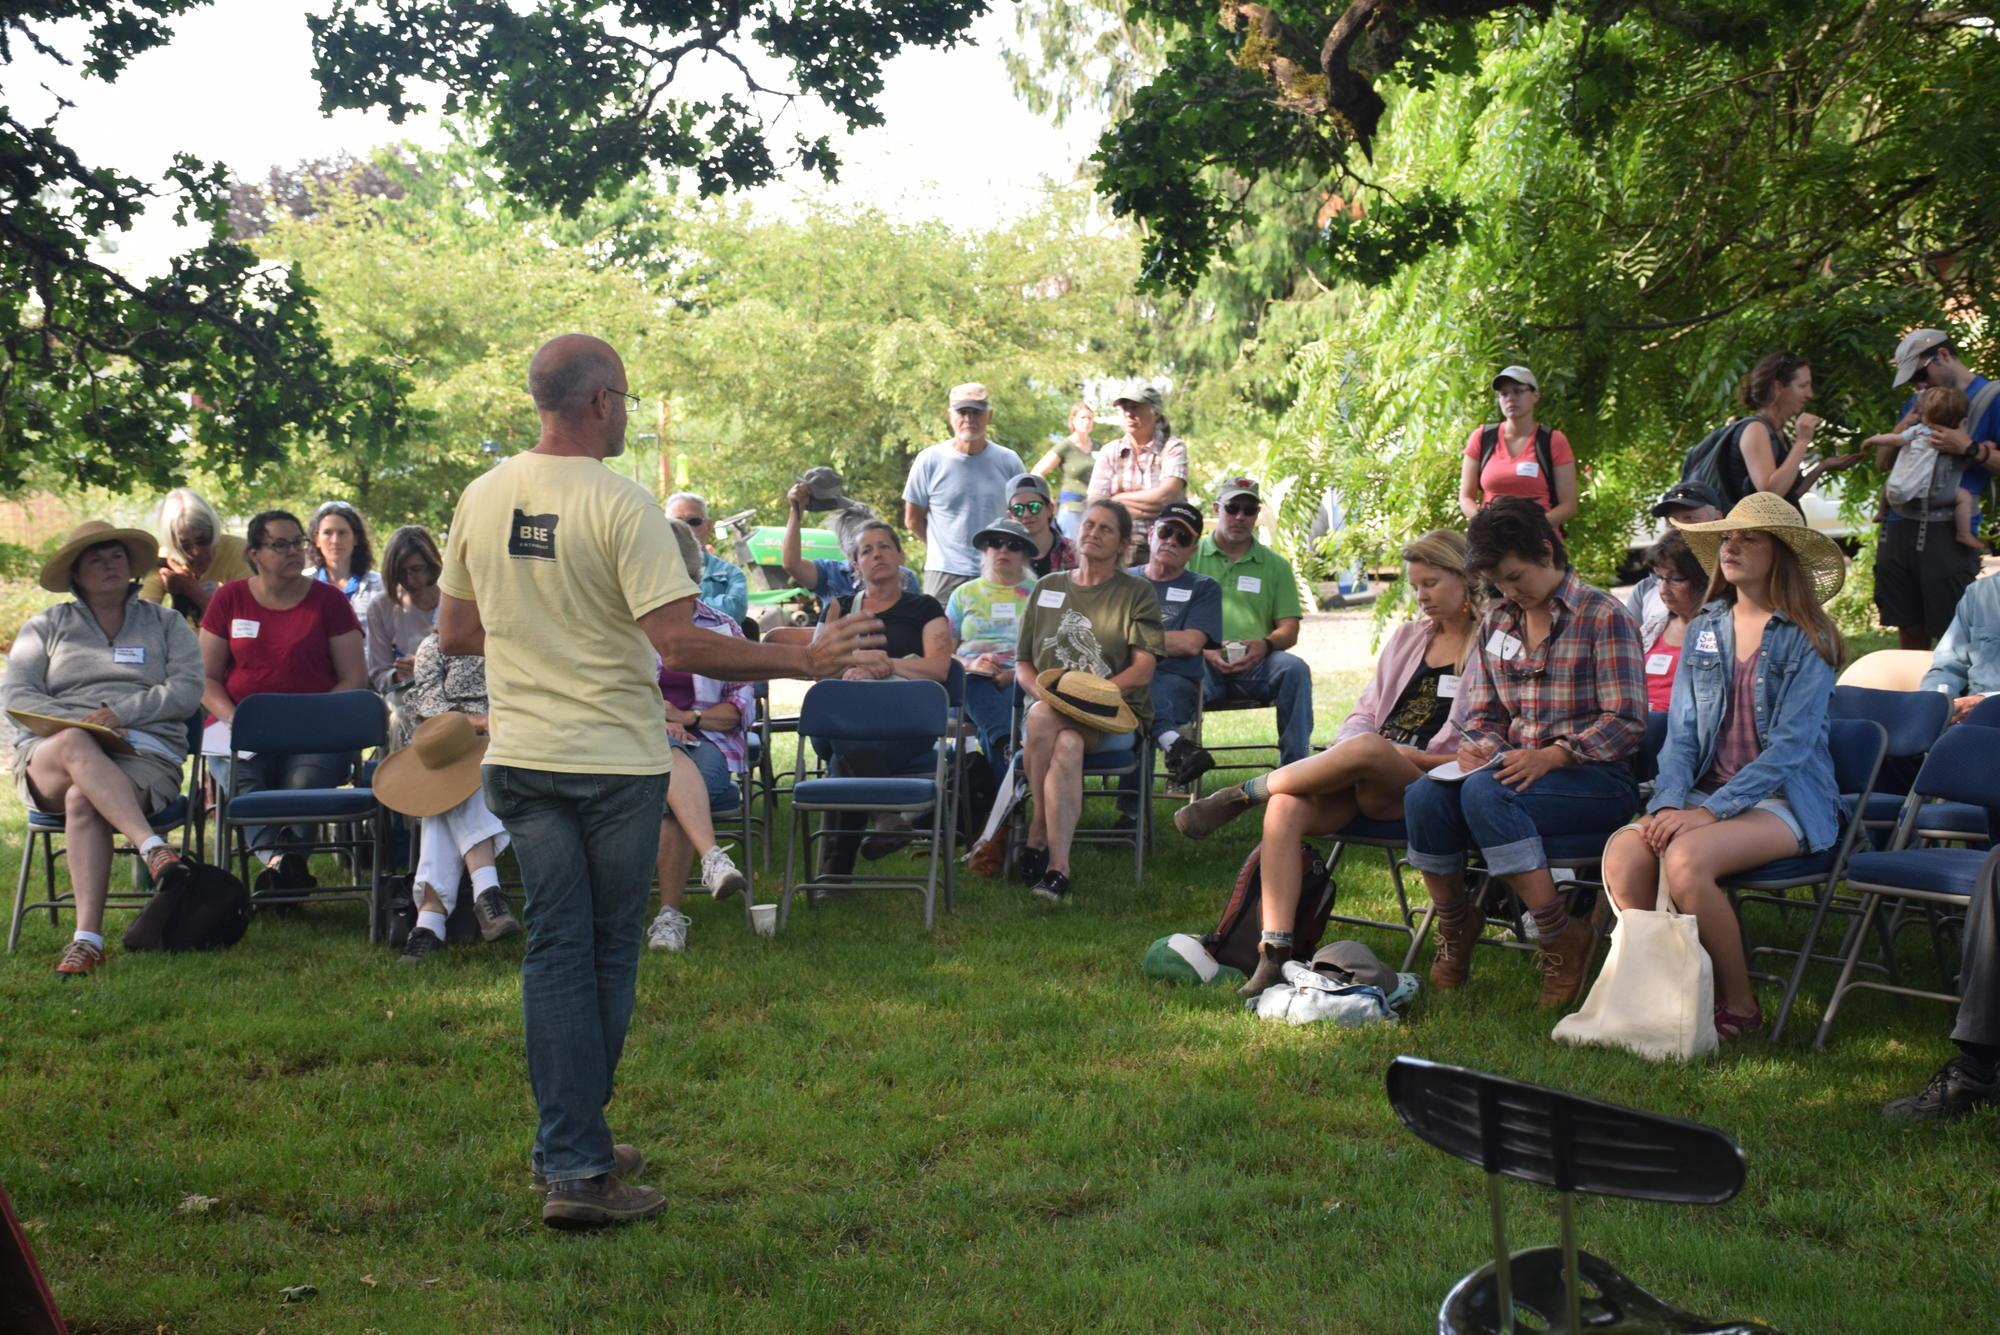 Michael O’Loughlin talks about the role of beneficial insects to a group that is gathered outside on the family grass